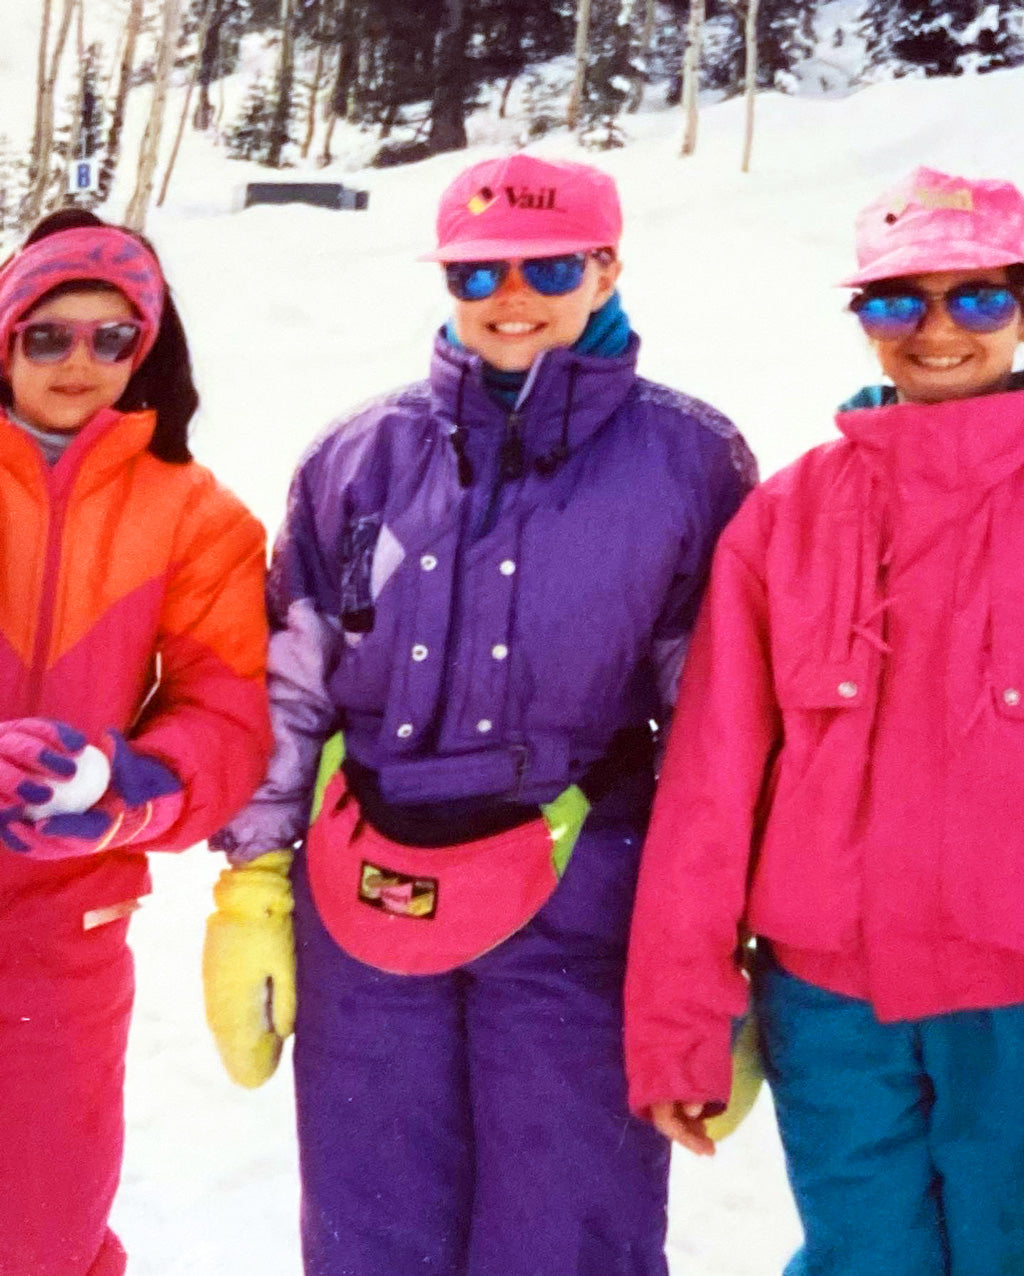 Kate Harvey skiing at Vail Mountain in the 1990s wearing a fanny pack as a child